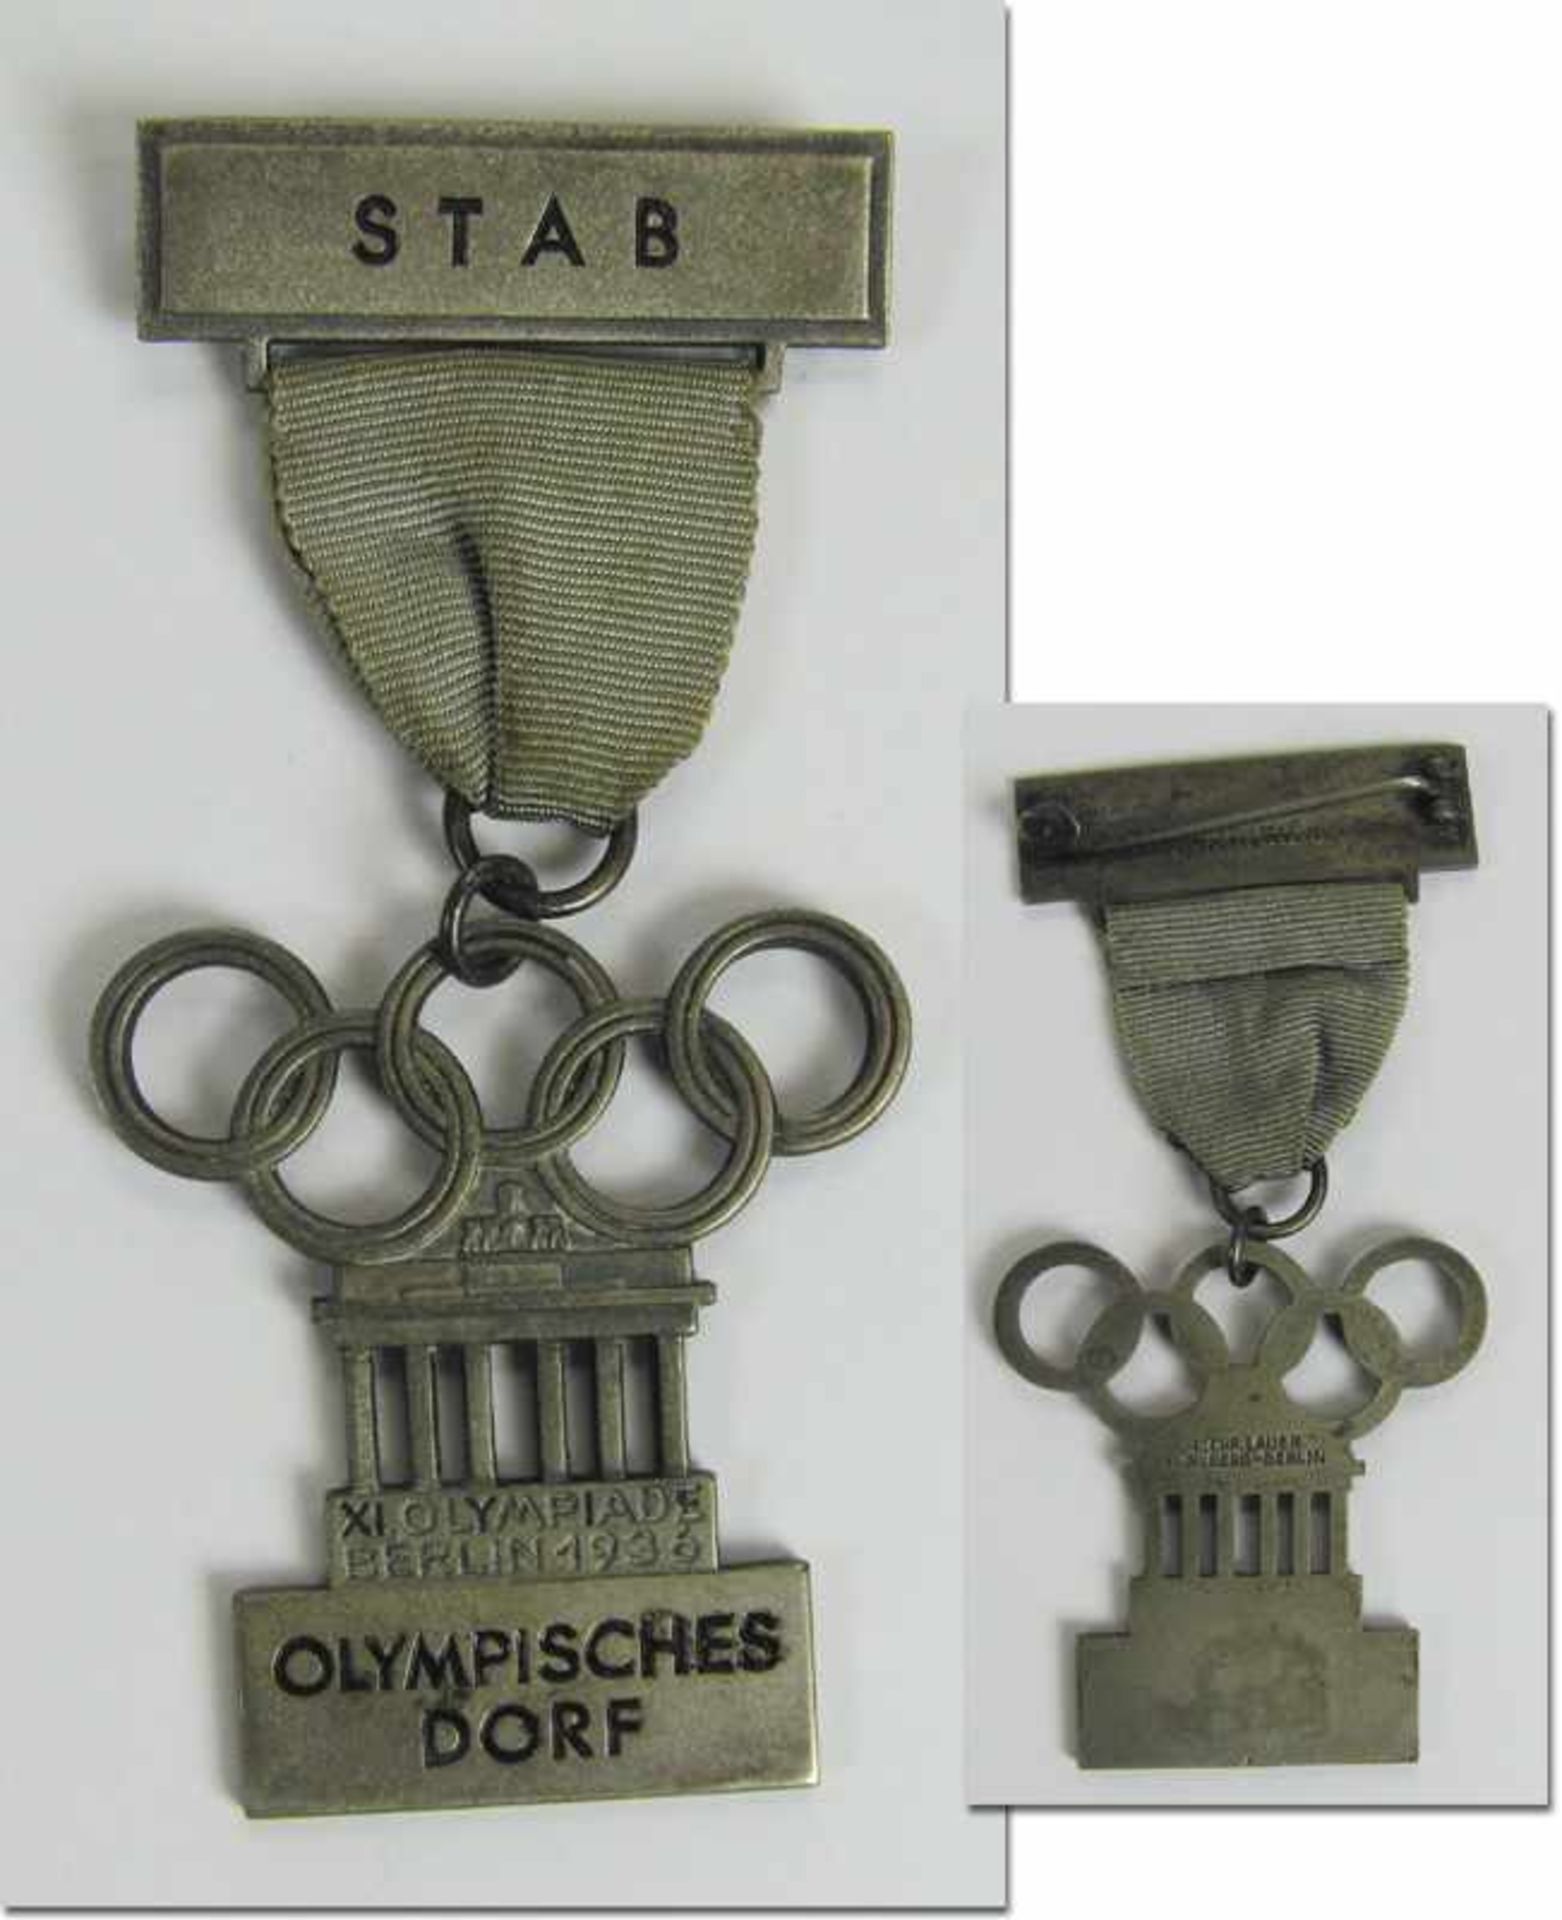 Participation Badge: Olympic Games 1936 "Stab" - Official particiapation badge for a member of the